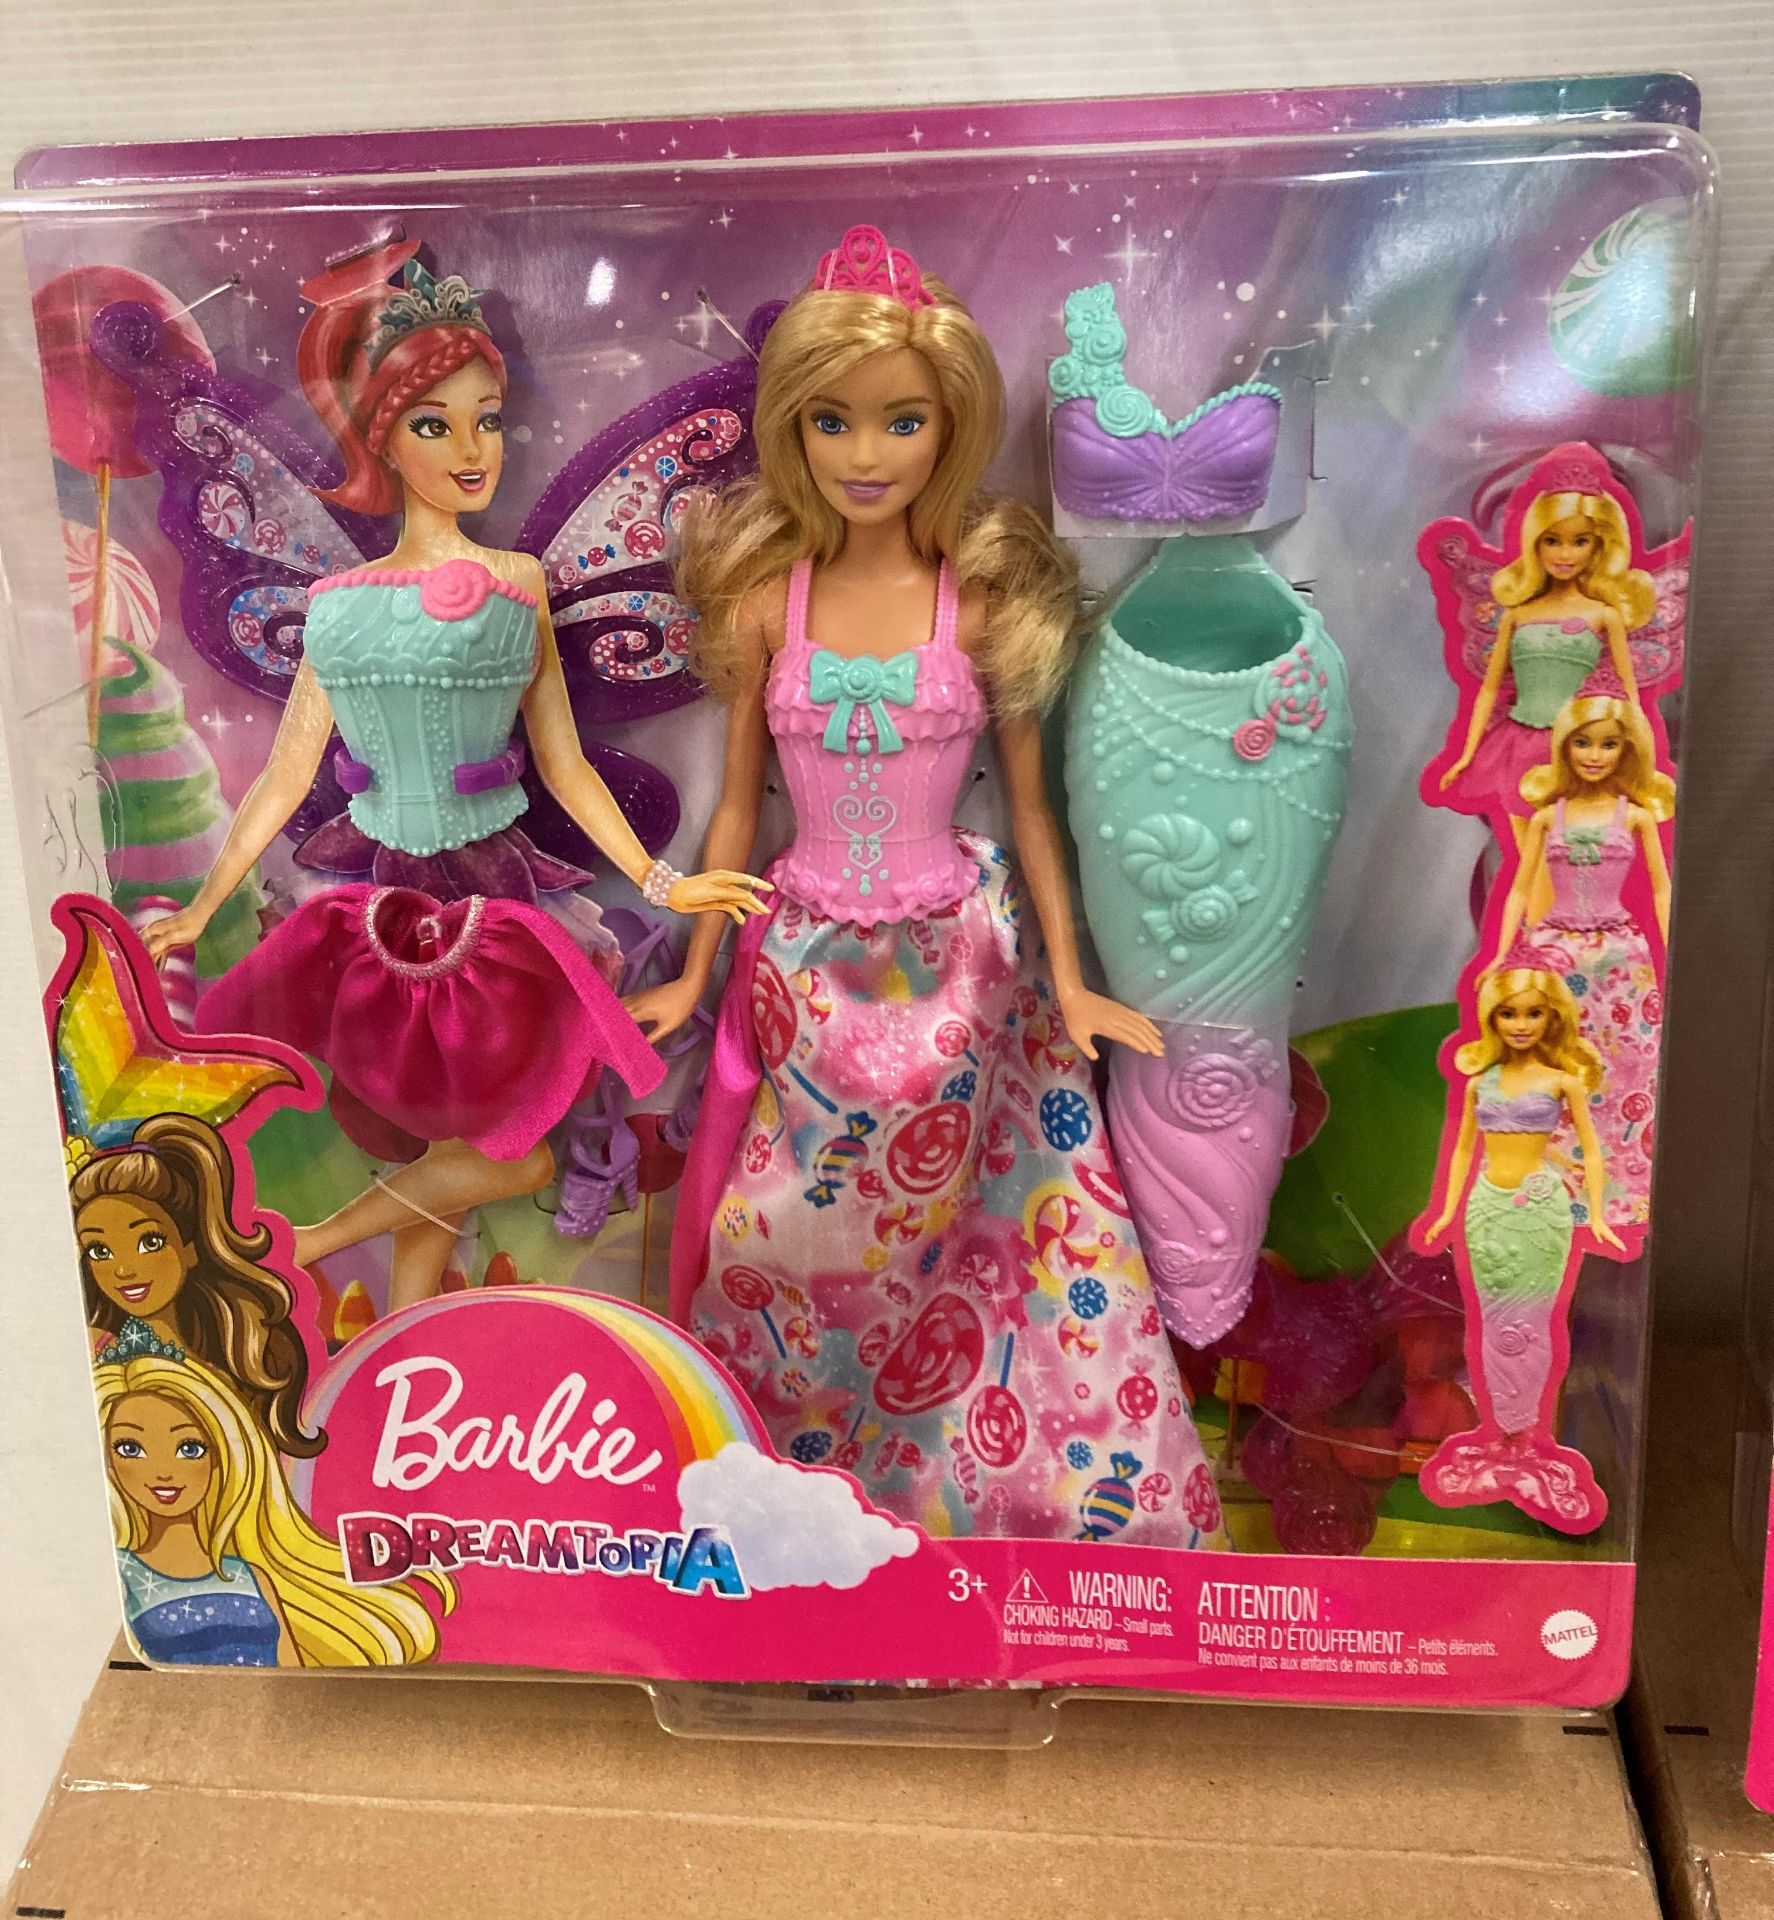 8 x Barbie Dreamtopia doll and accessories (2 x outer boxes) (saleroom location: M08) - Image 2 of 3